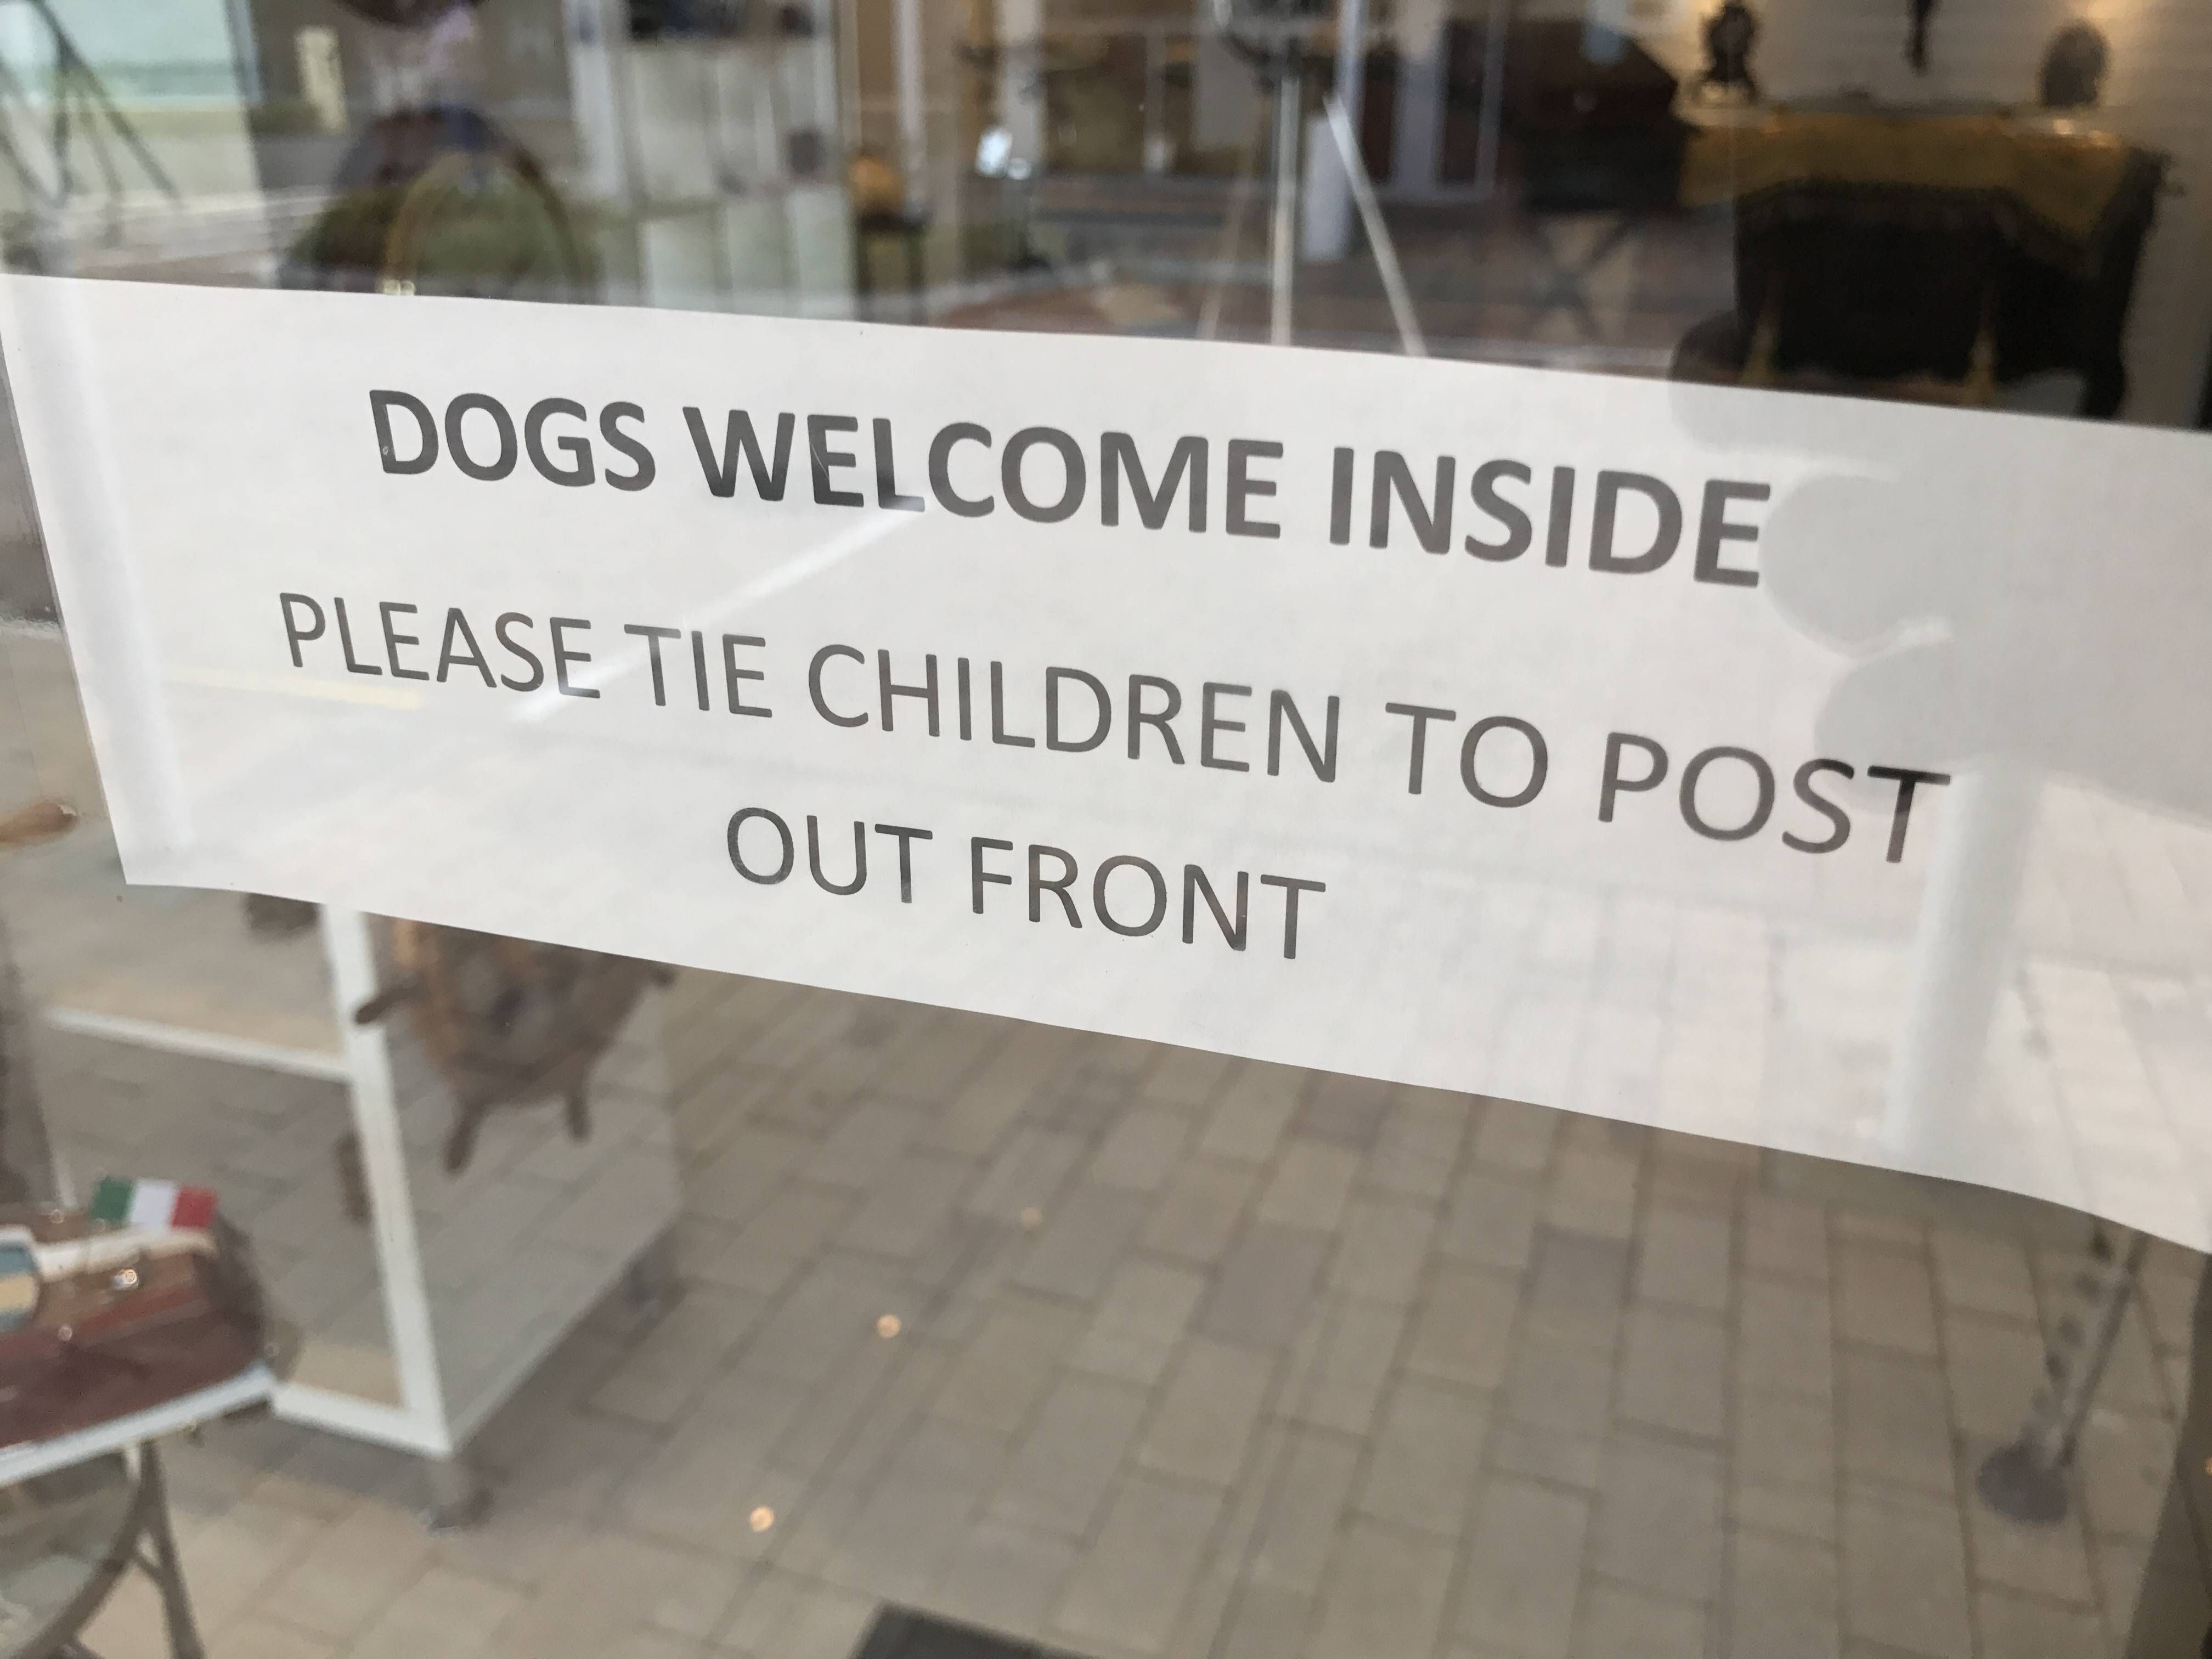 Excellent store policy